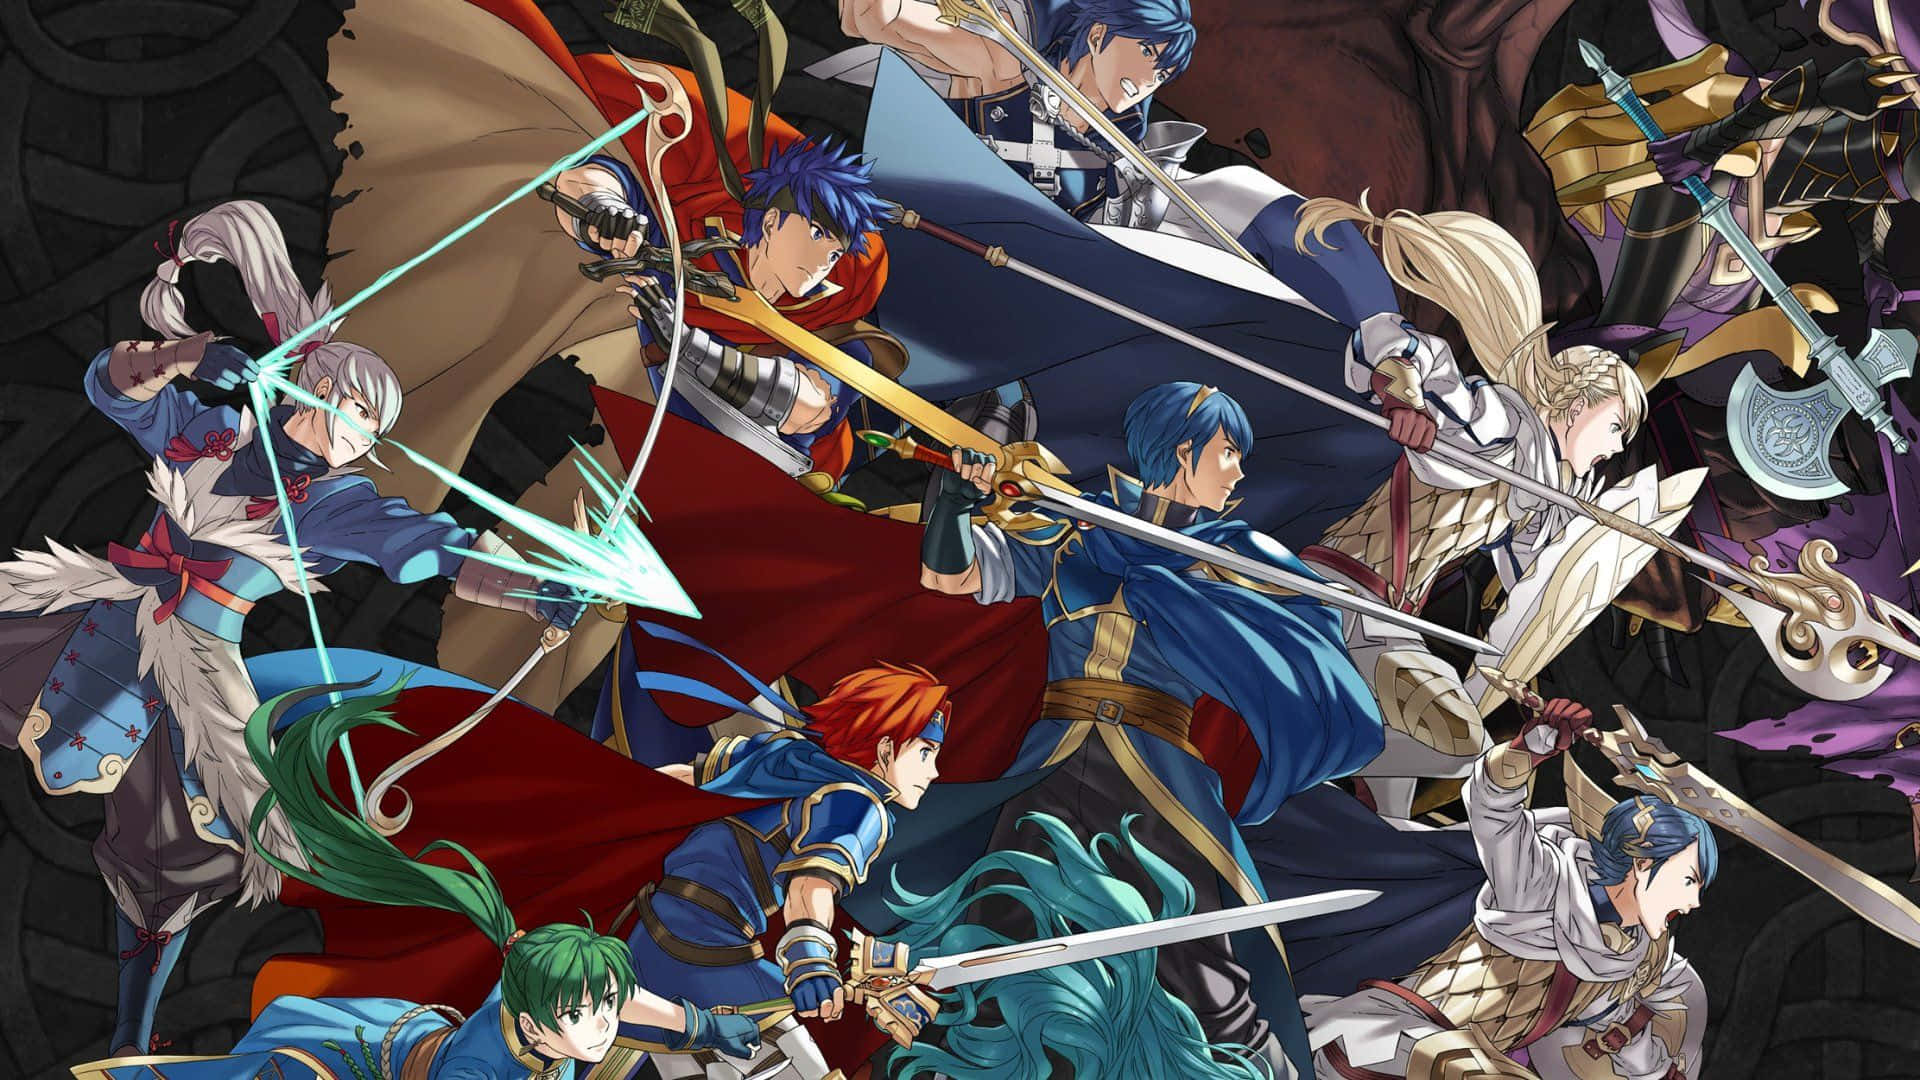 A Group Of Characters With Swords And Armor